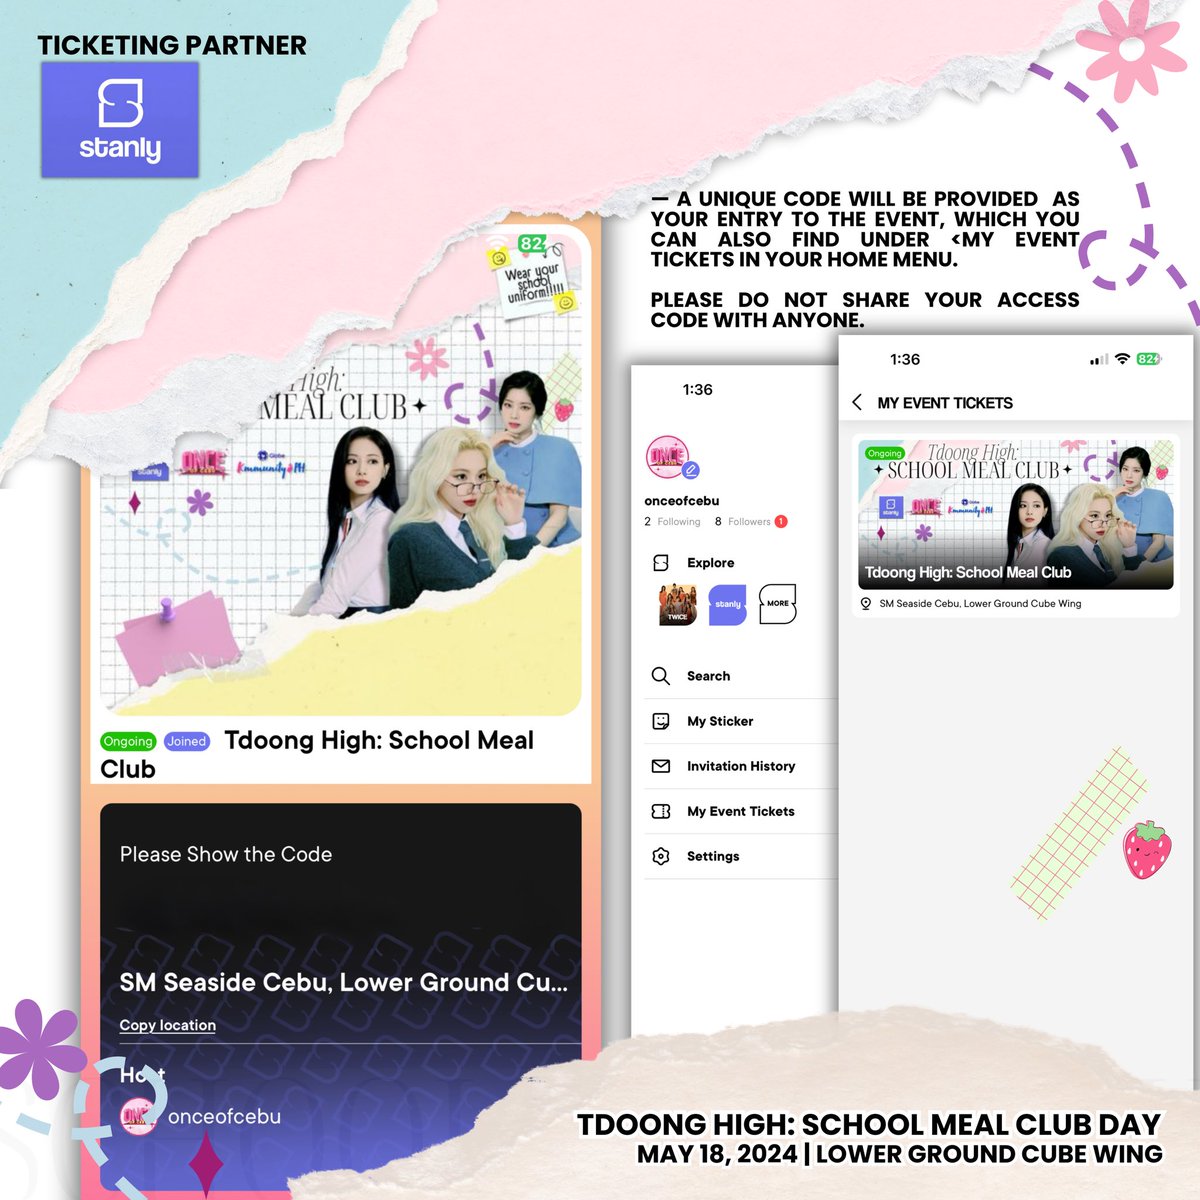 📣 EARLY ENROLLMENT IS NOW AVAILABLE ✨

💳 Download the Stanly app and enter code DFCWBZ. Join the Twice fandom and follow the instructions below to secure your ticket using your debit or credit card. 

See you there!! 💖

#CHAEYOUNG #DAHYUN #TZUYU
#ONCEofCebuEvents #TWICE